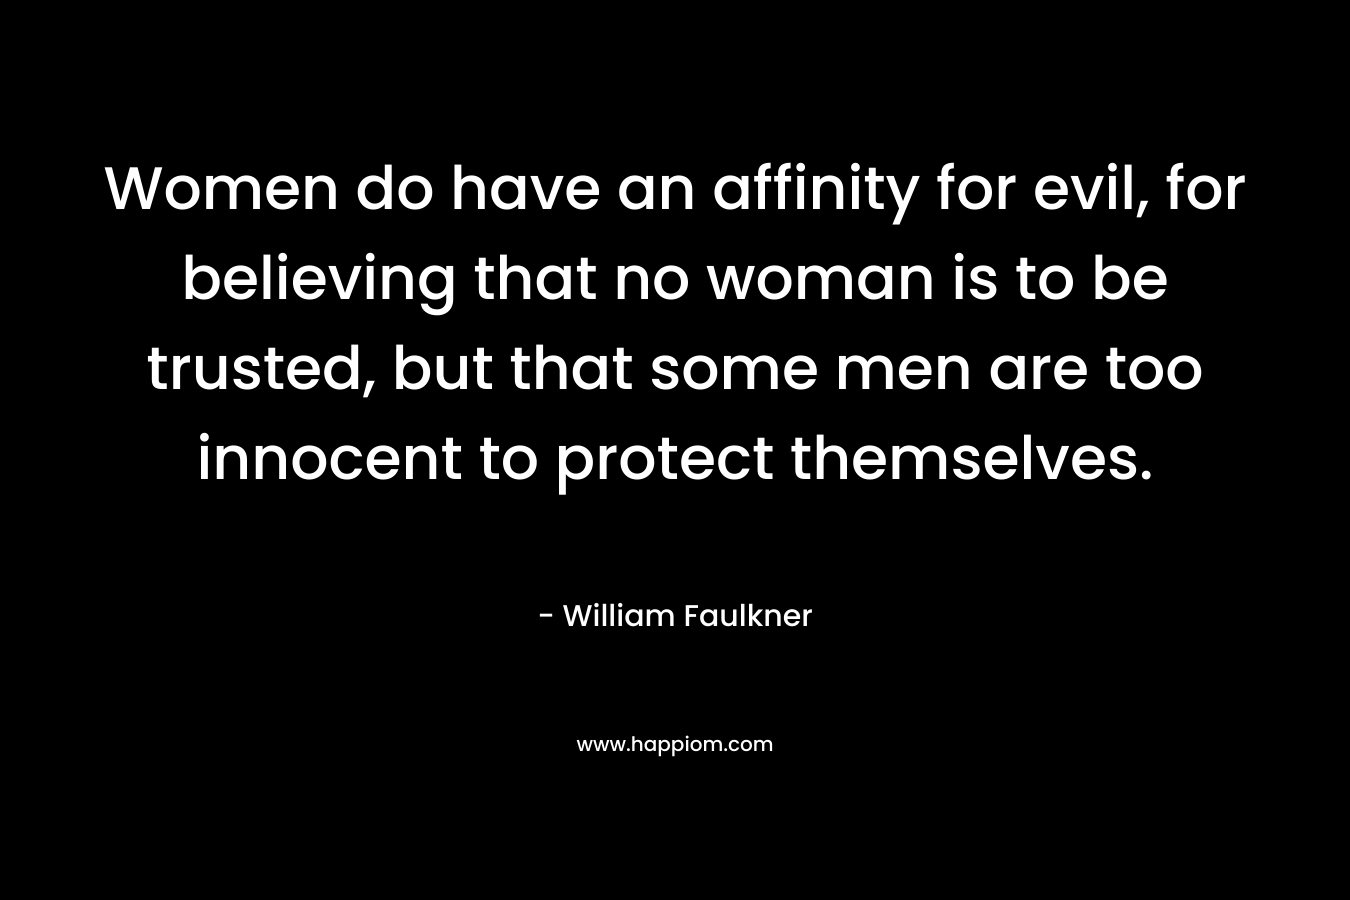 Women do have an affinity for evil, for believing that no woman is to be trusted, but that some men are too innocent to protect themselves. – William Faulkner